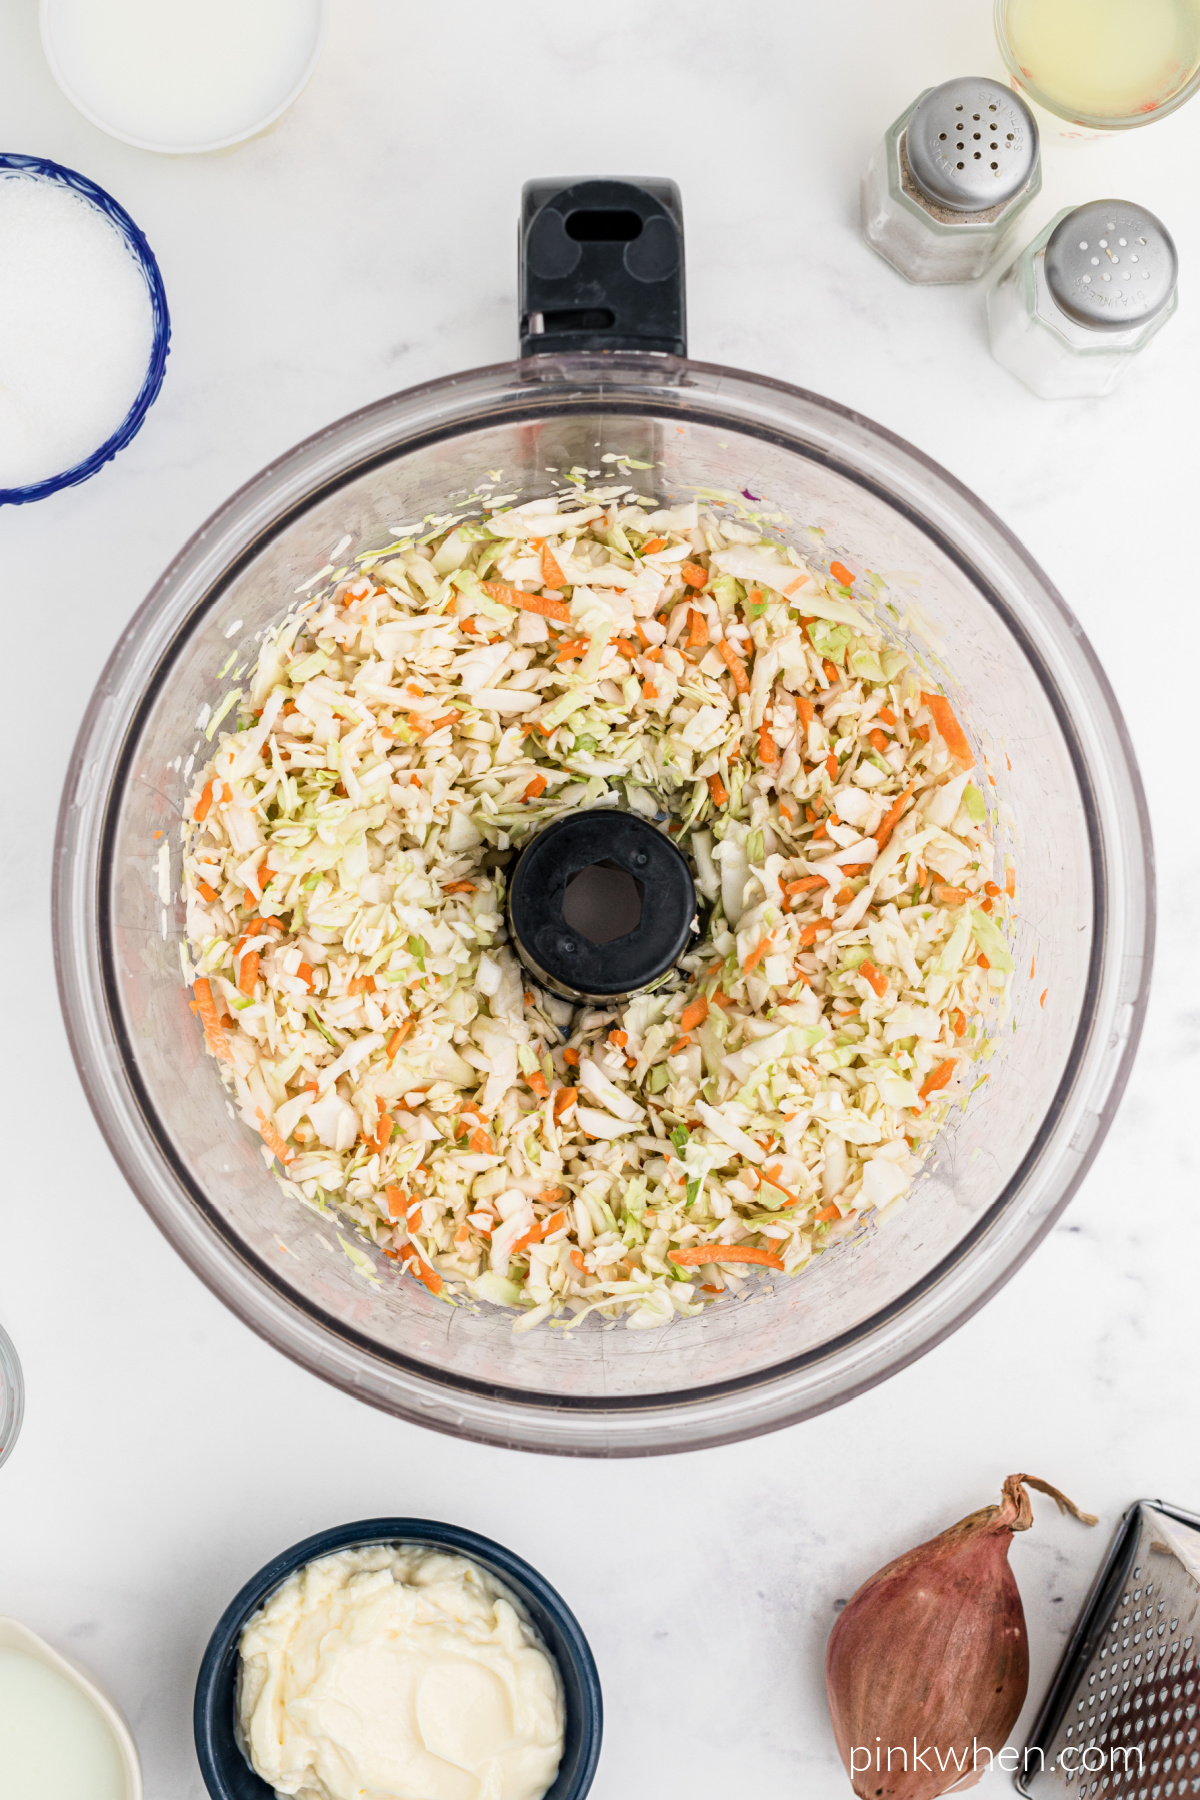 Coleslaw ingredients being added to a food processor.